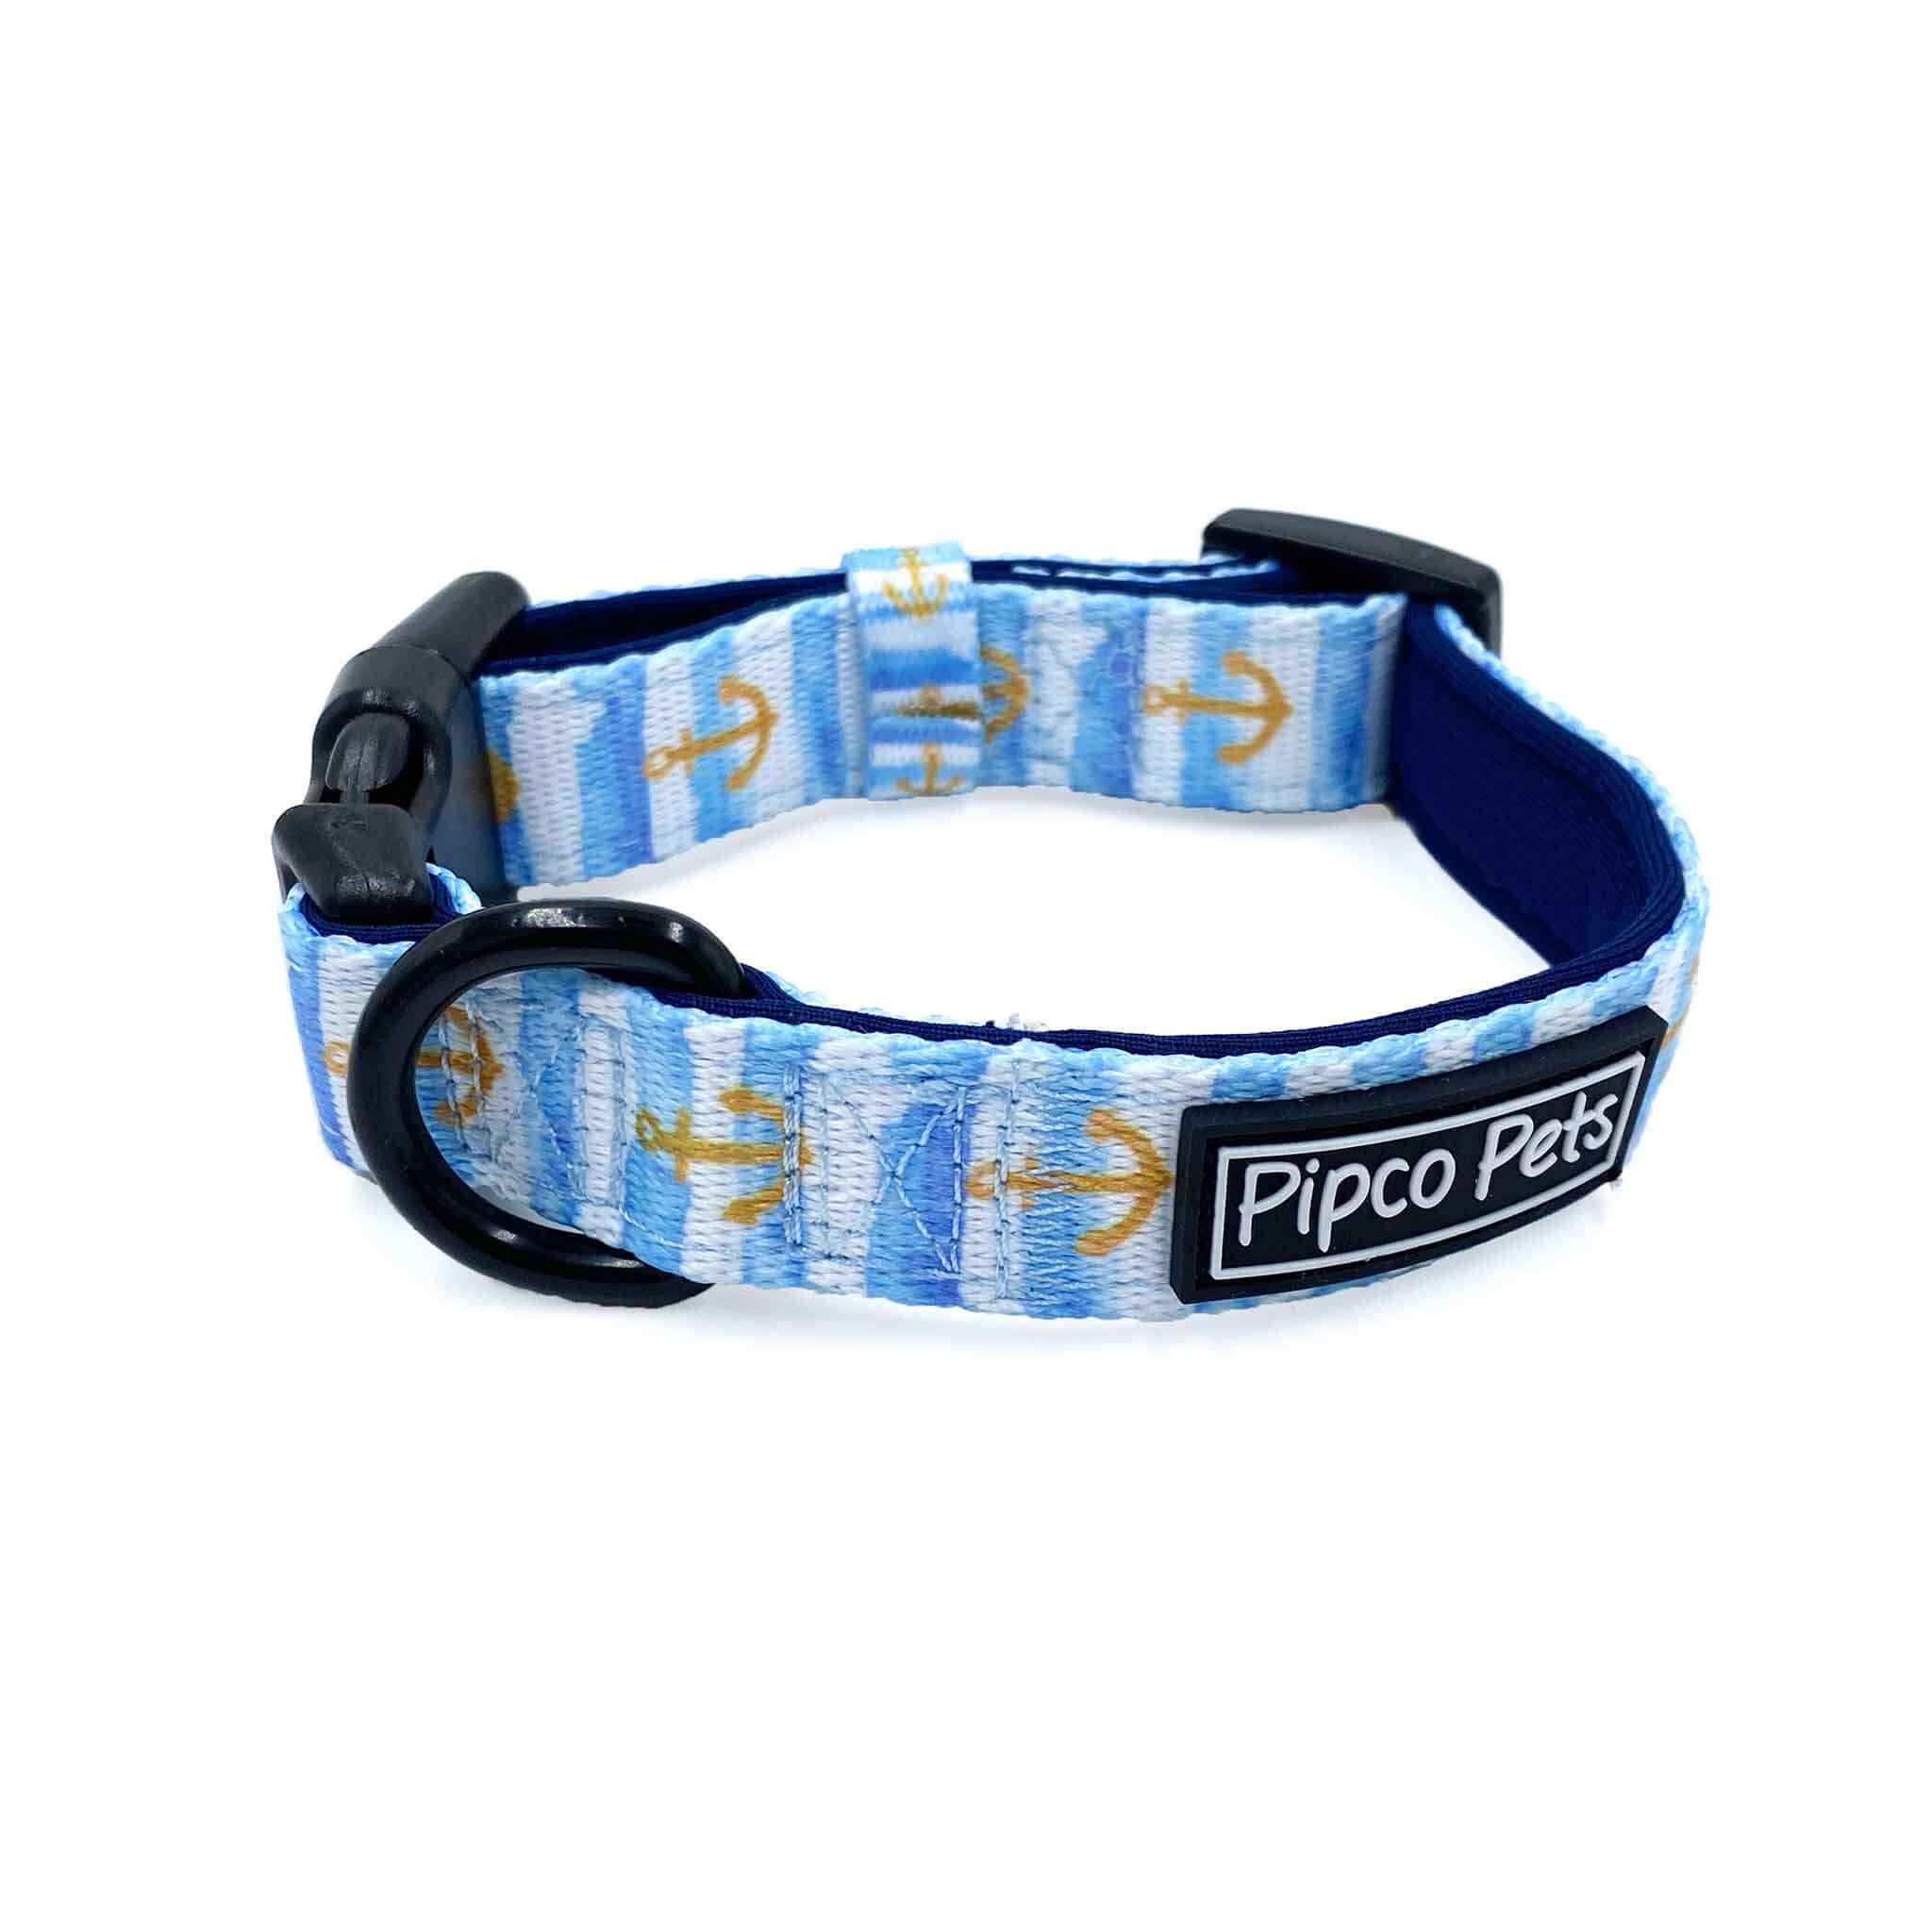 Pipco Pets dog collar with blue Sailor pattern